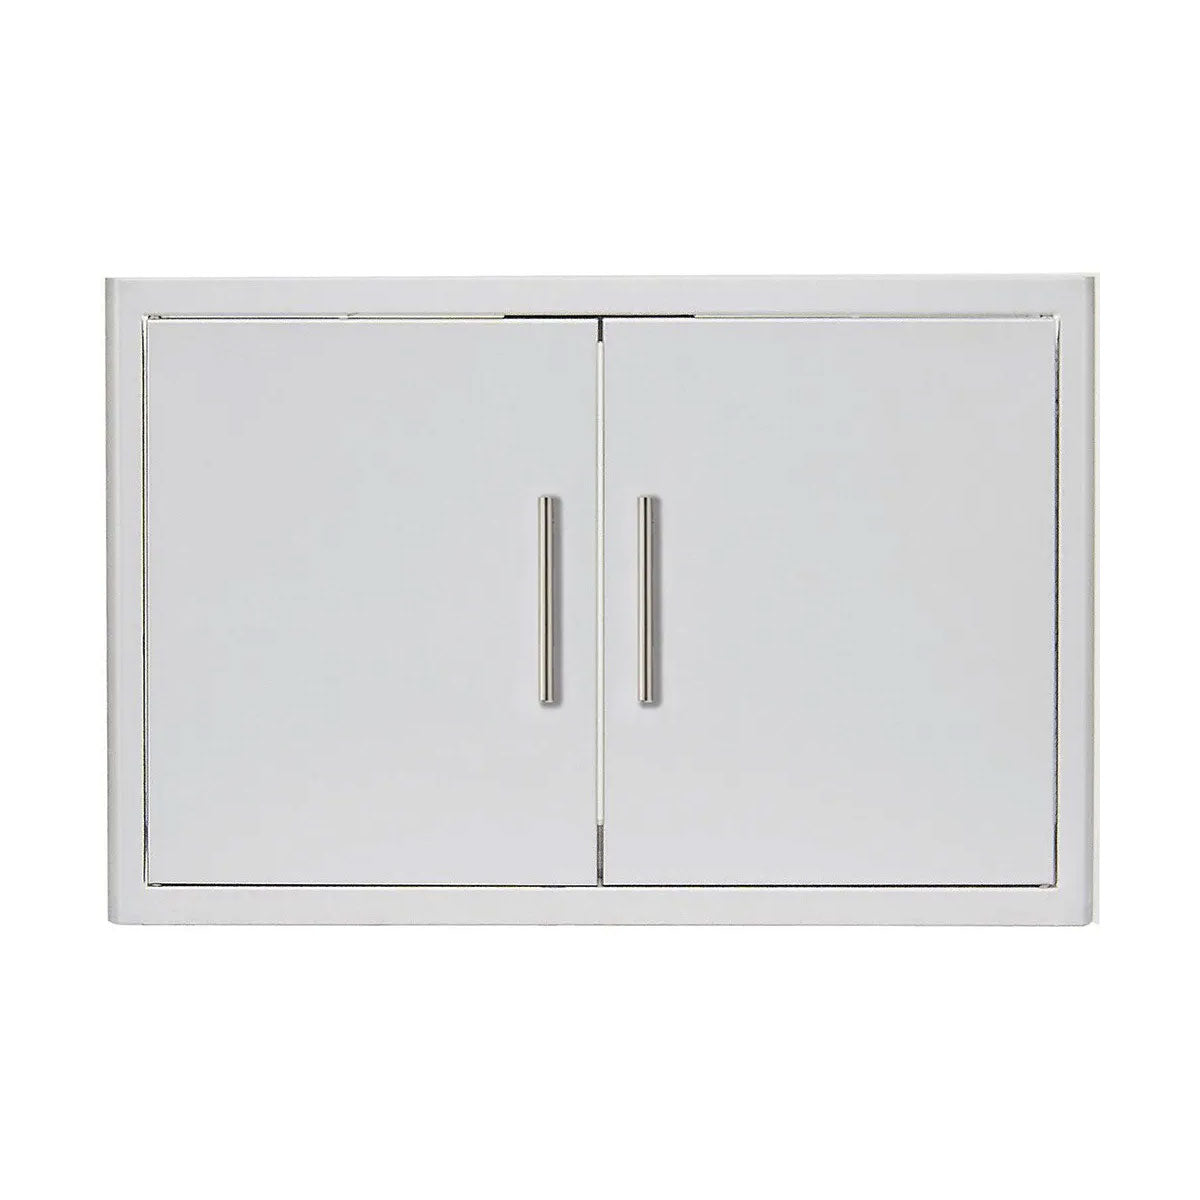 32" Double Access Door with Soft Close Hinges and Paper Towel Holder - BLZ-AD32-R-SC